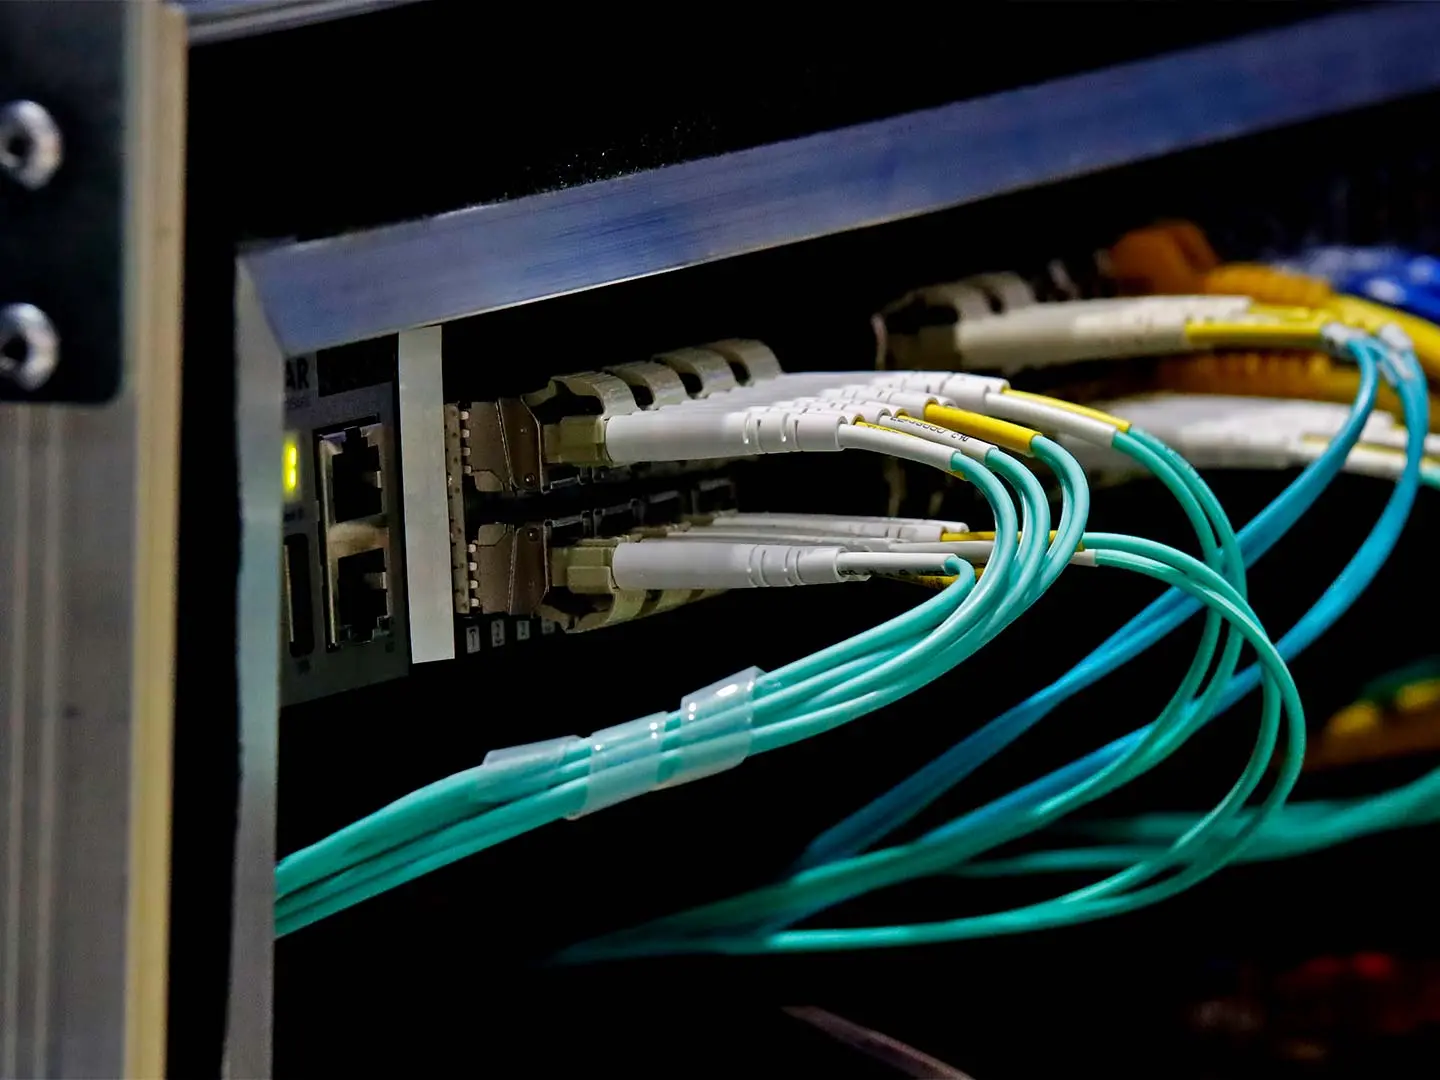 Network switch and ethernet cables. Data Center Concept.